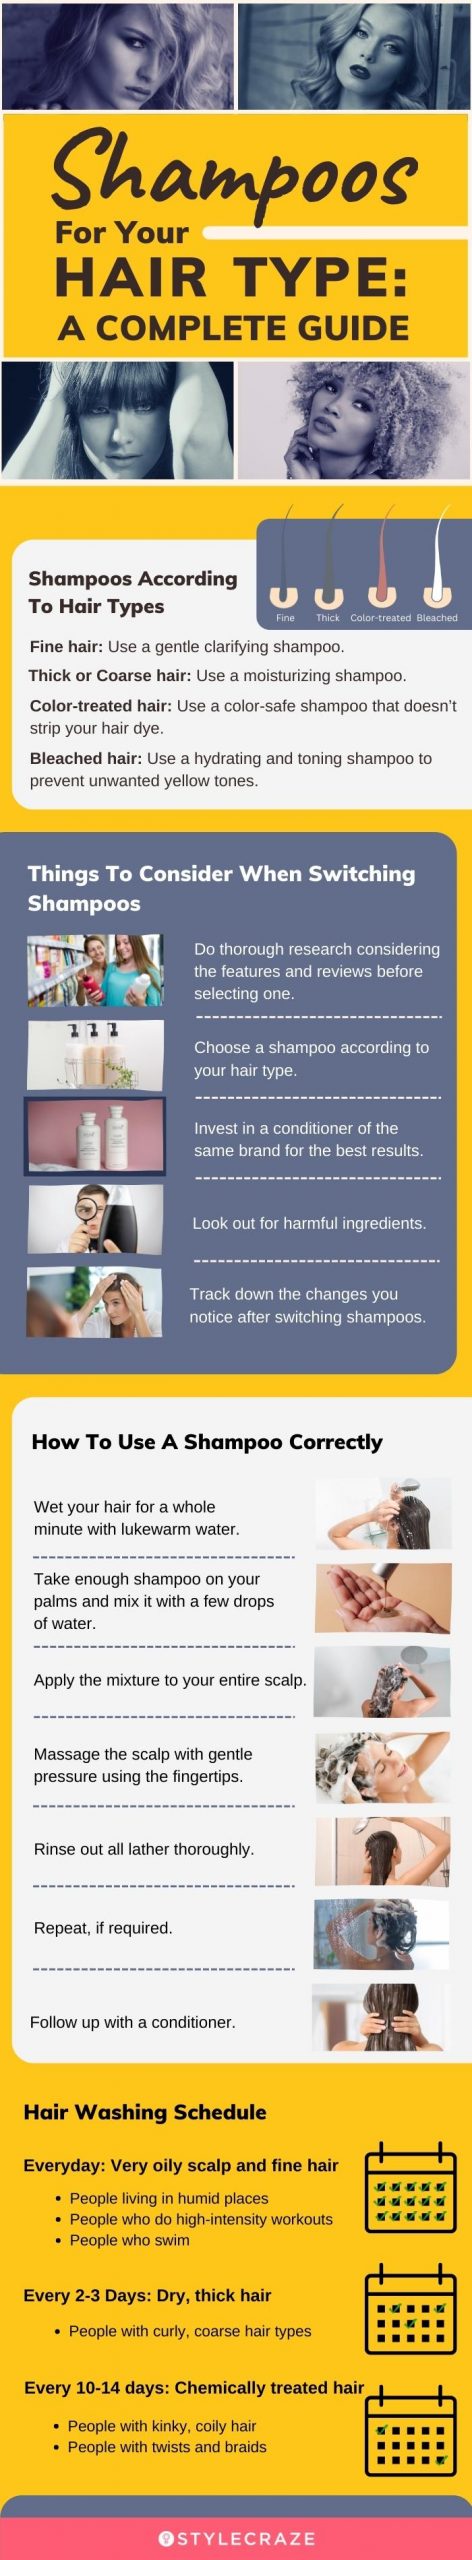 Shampoos For Your Hair Type [infographic]